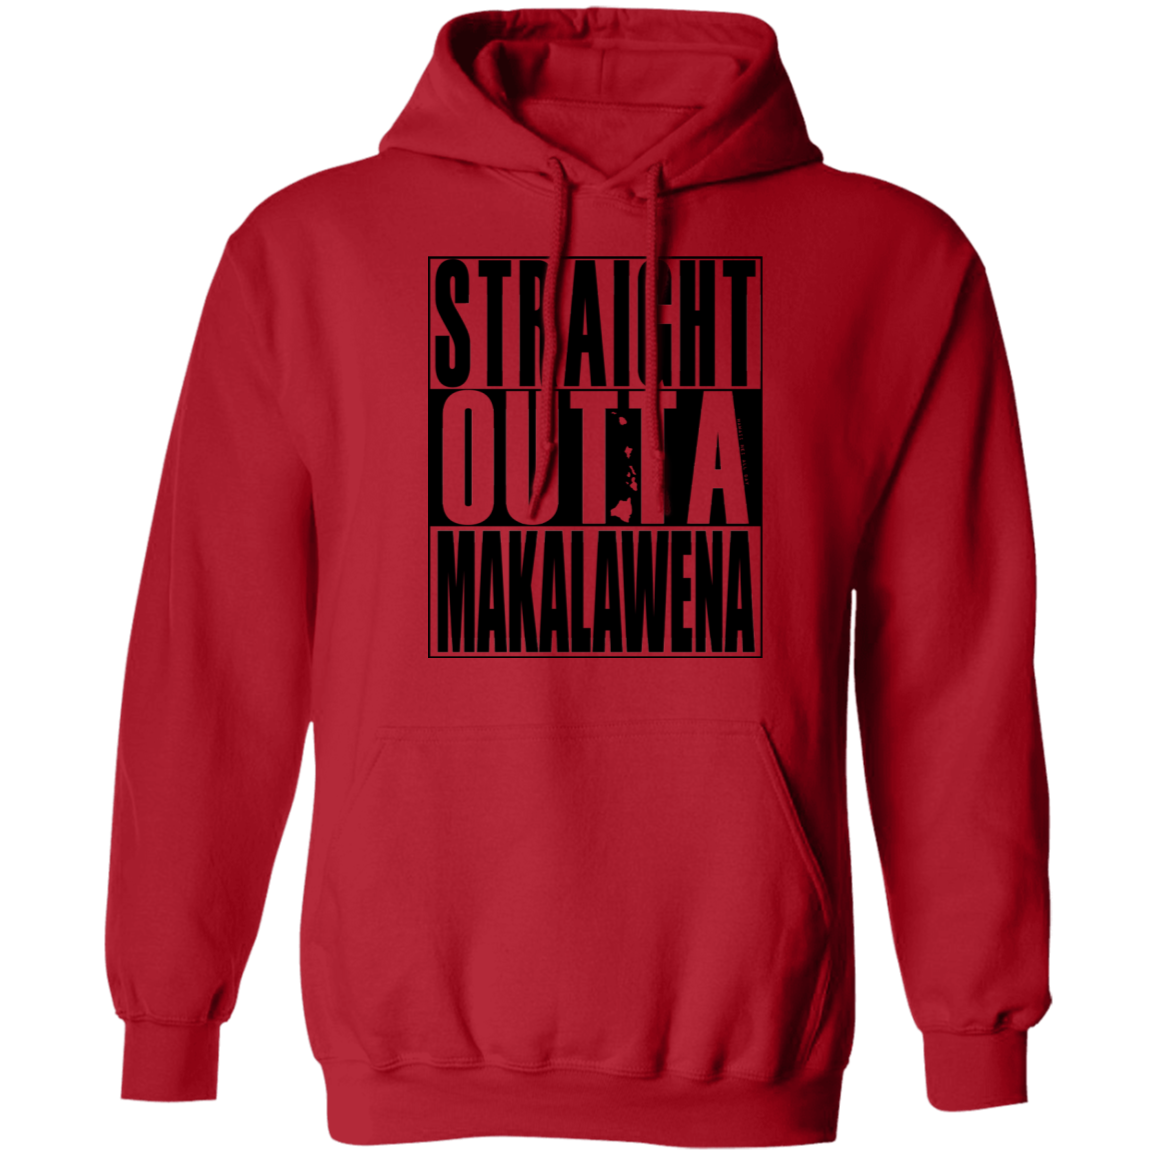 Straight Outta Makalawena(black ink) Pullover Hoodie